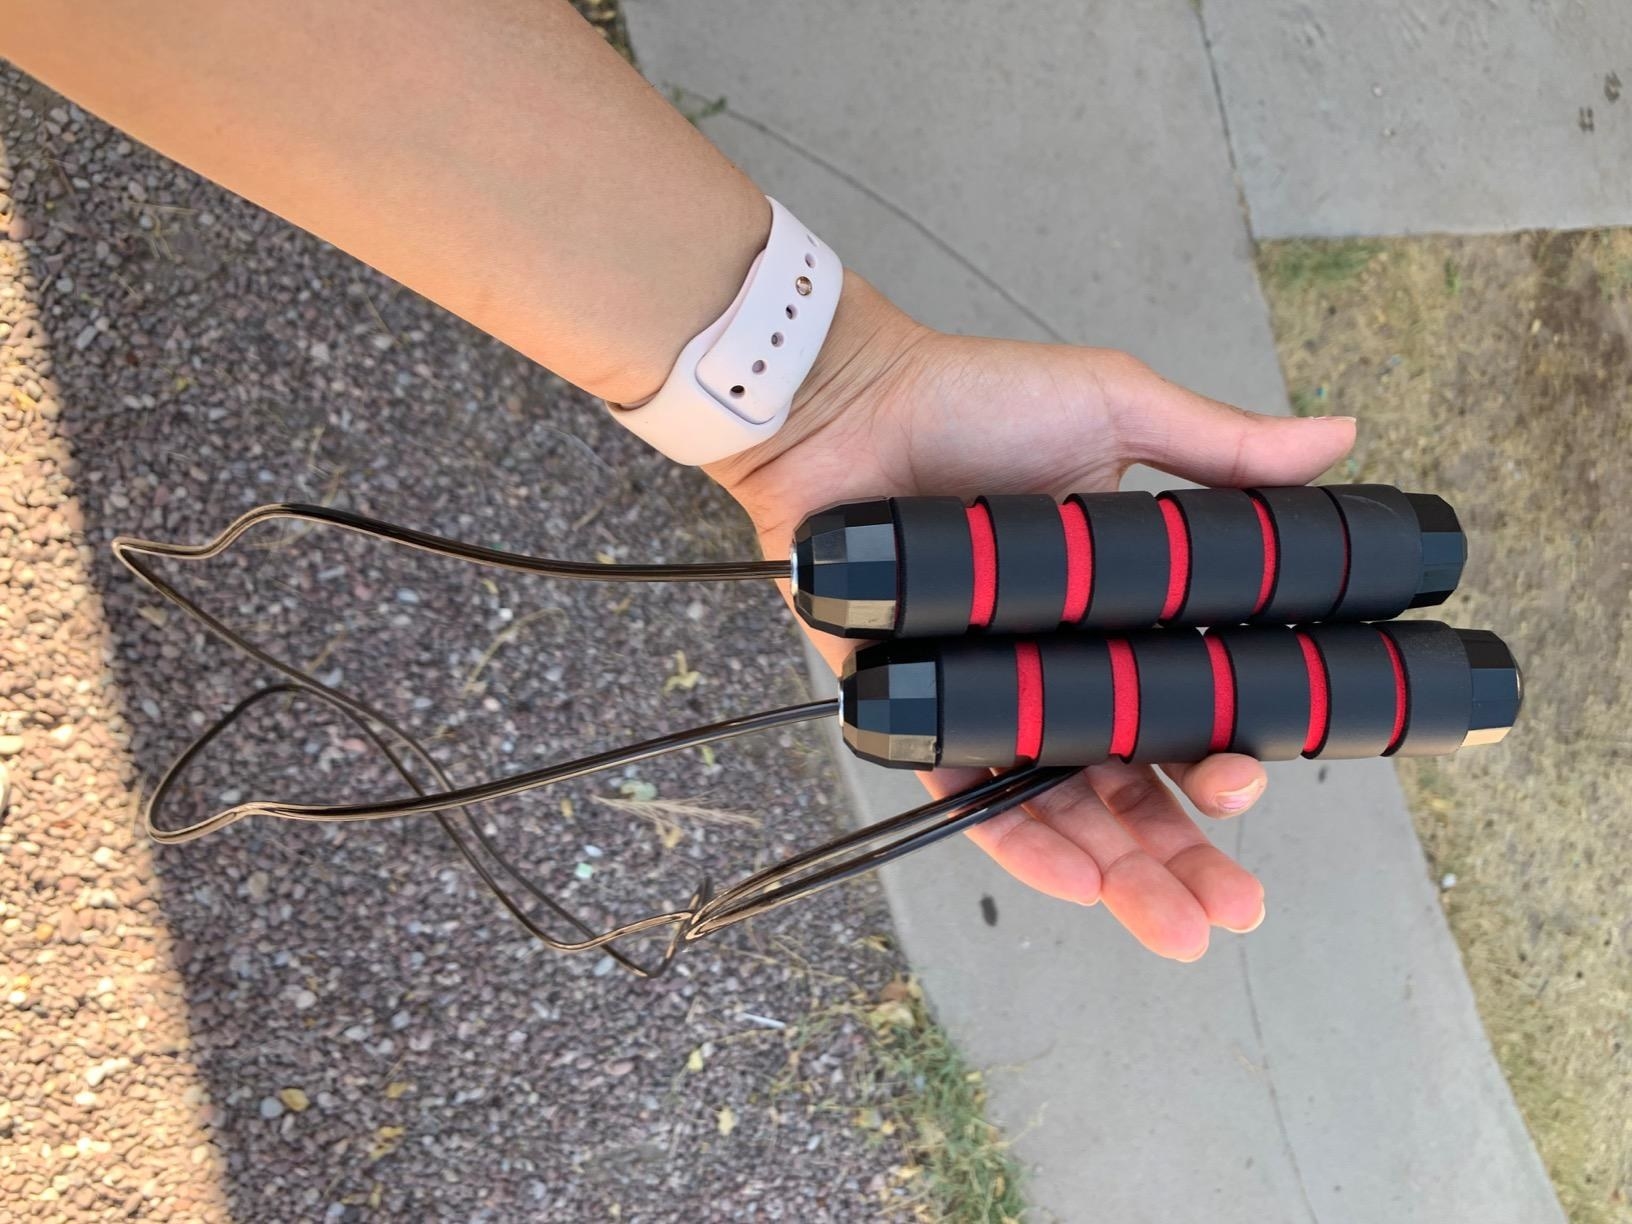 reviewer holds black and red jump rope in hands over sidewalk